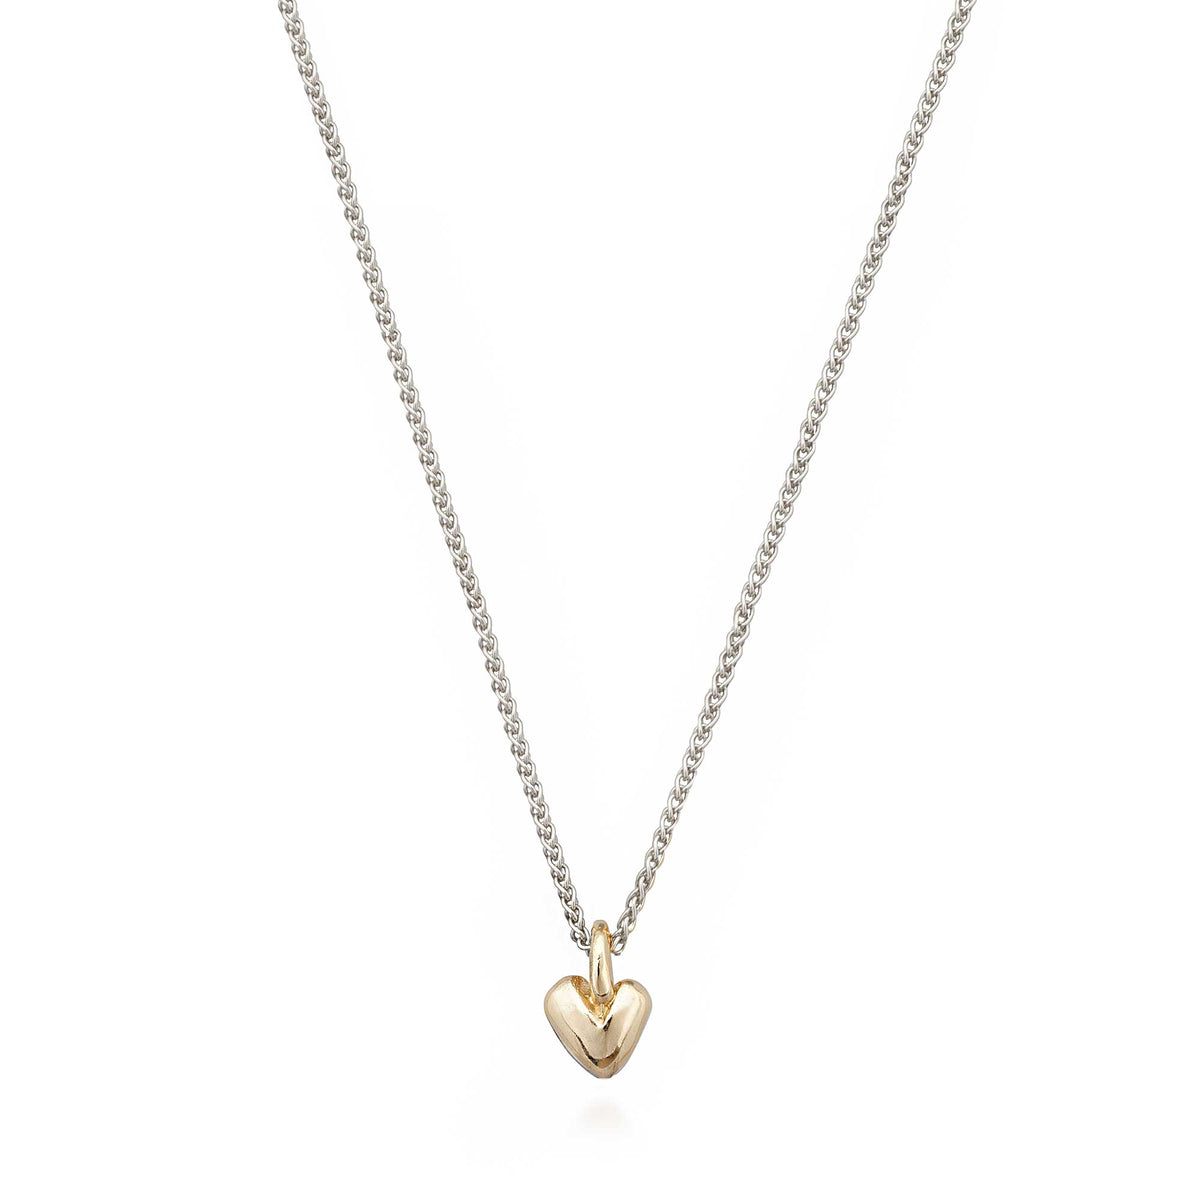 Solid silver &amp; gold recycled heart pendant Scarlett Jewellery UK Slow fashion trends